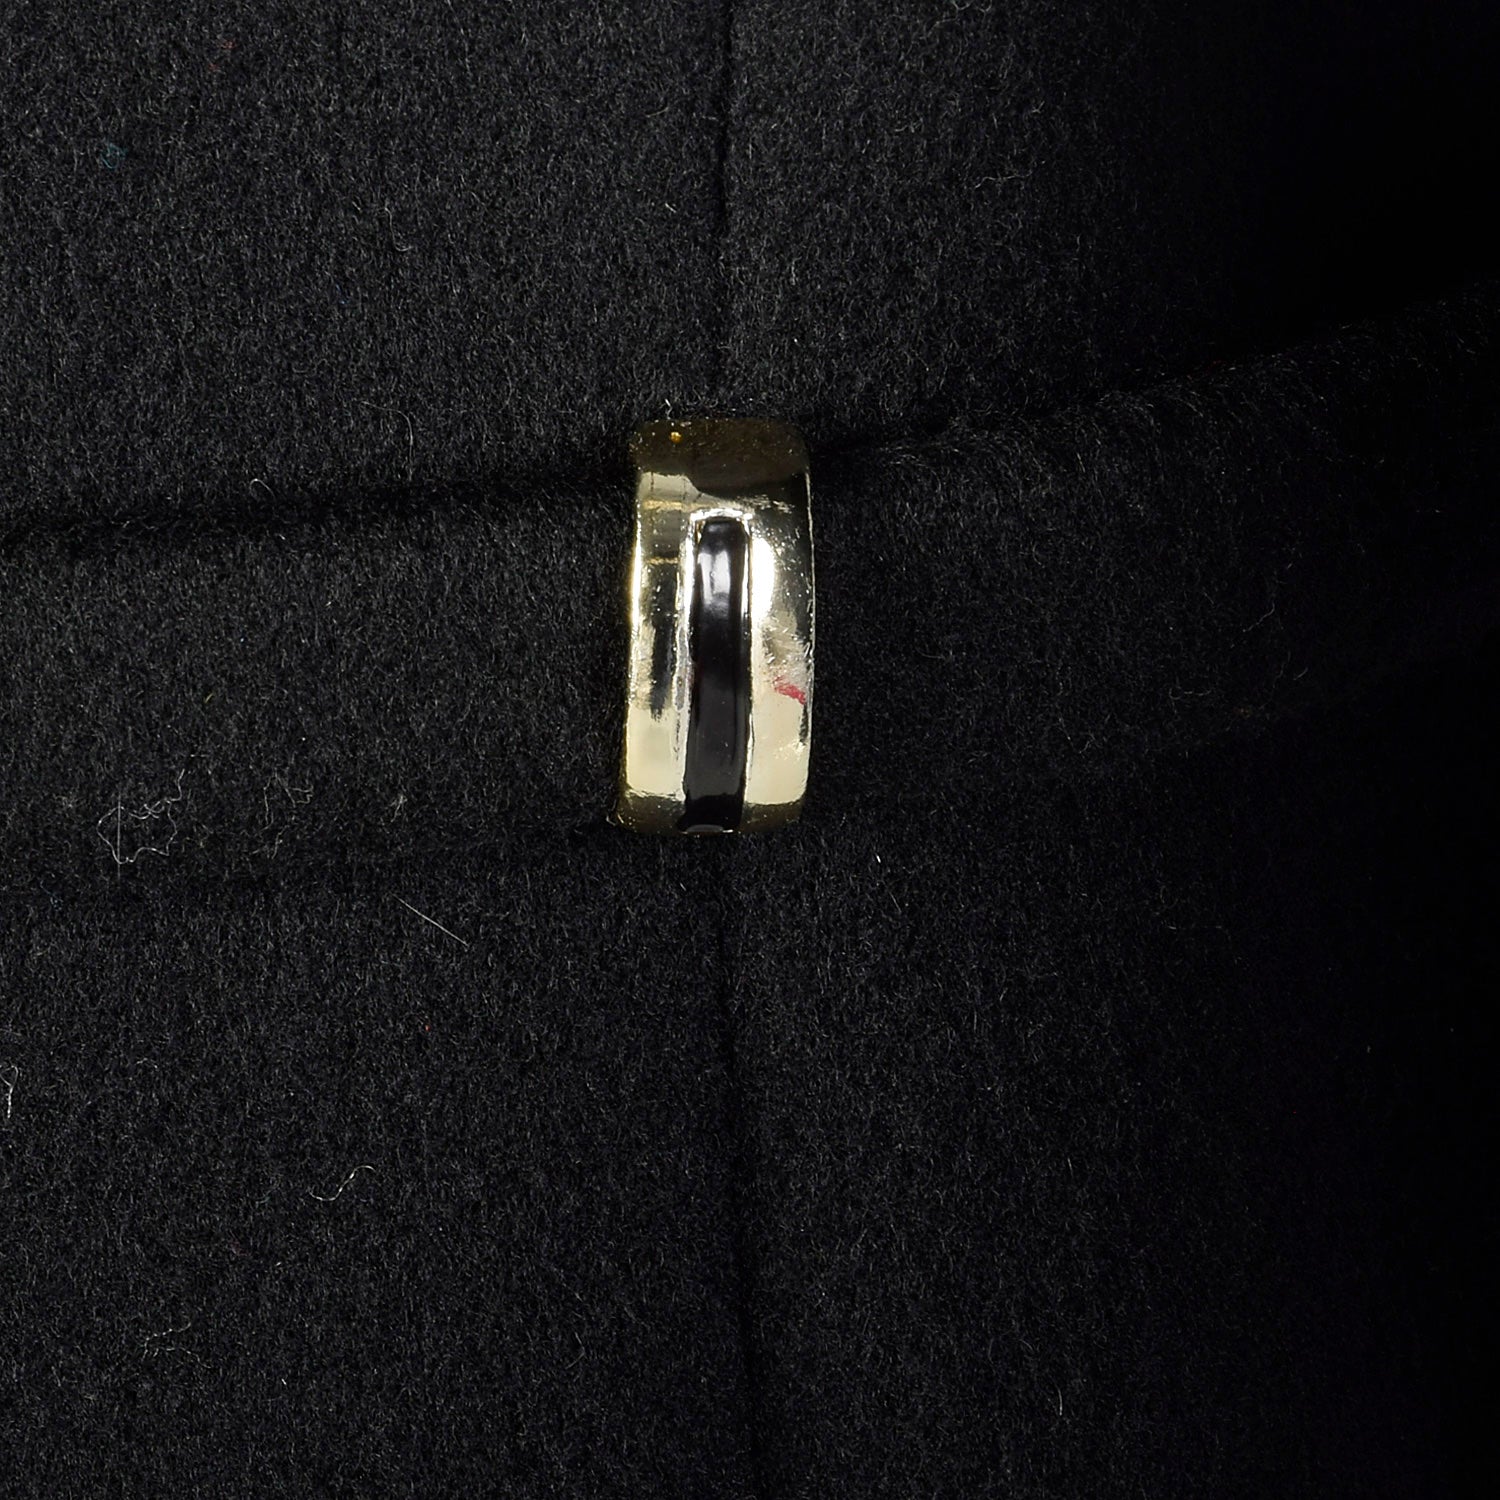 Small 1960s Mod Winter Coat Black Wool Double Breasted Overcoat